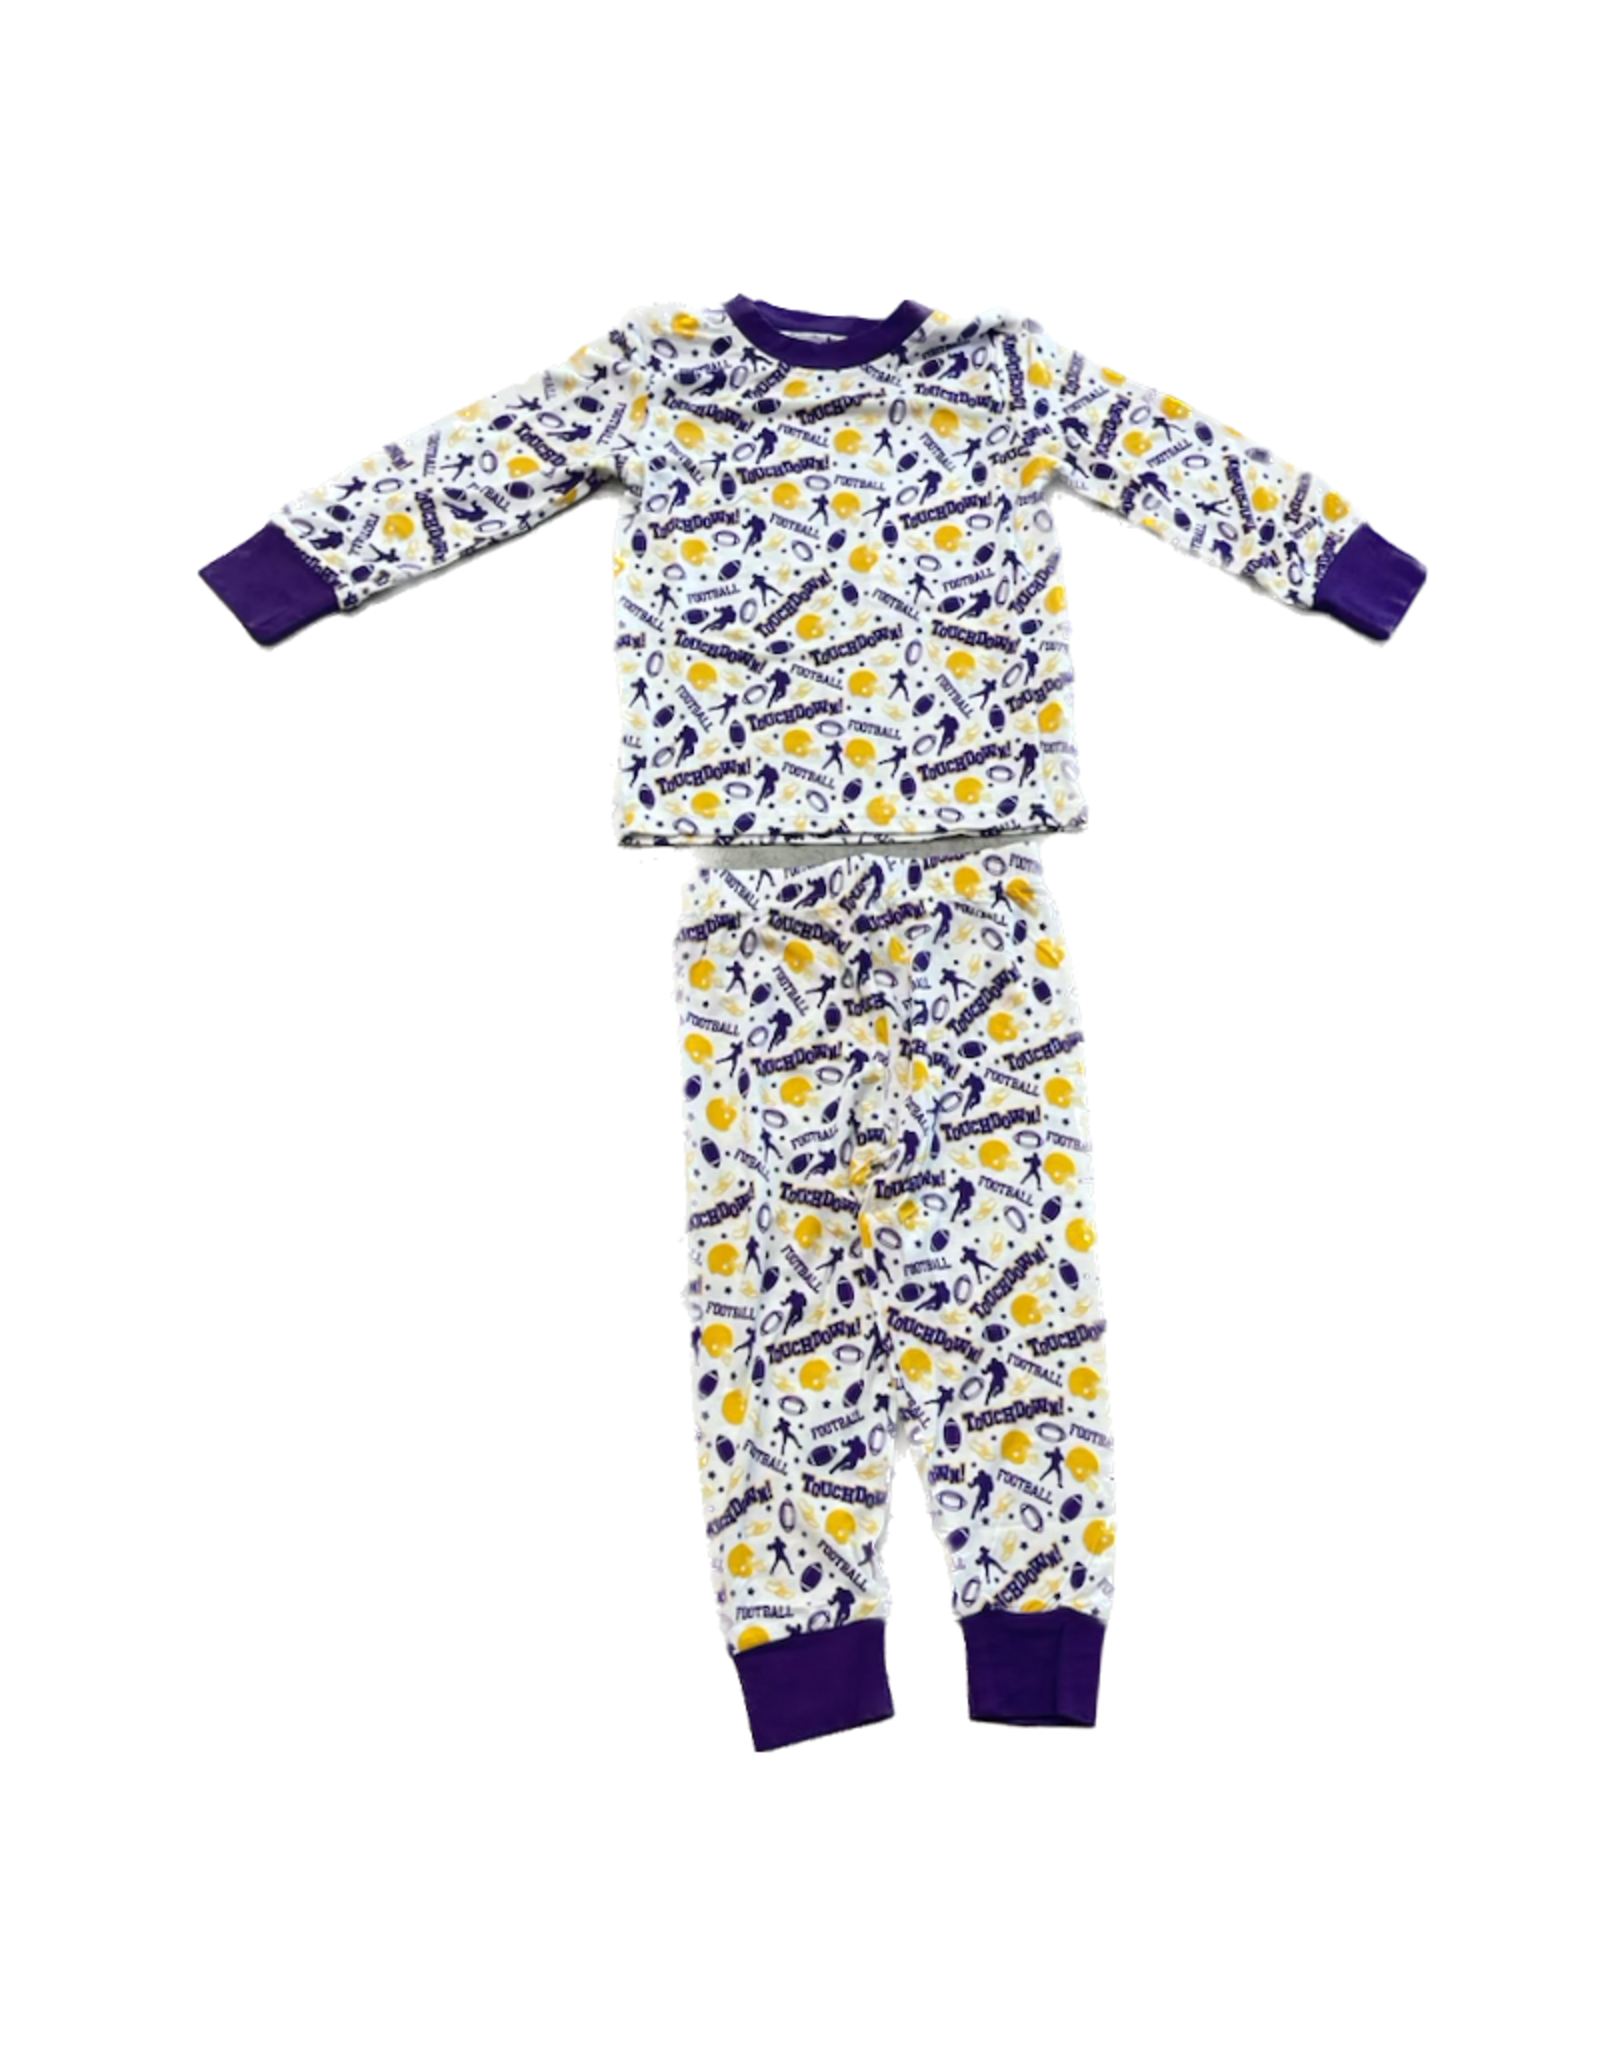 Belle Cher Purple and Yellow Football Pajamas